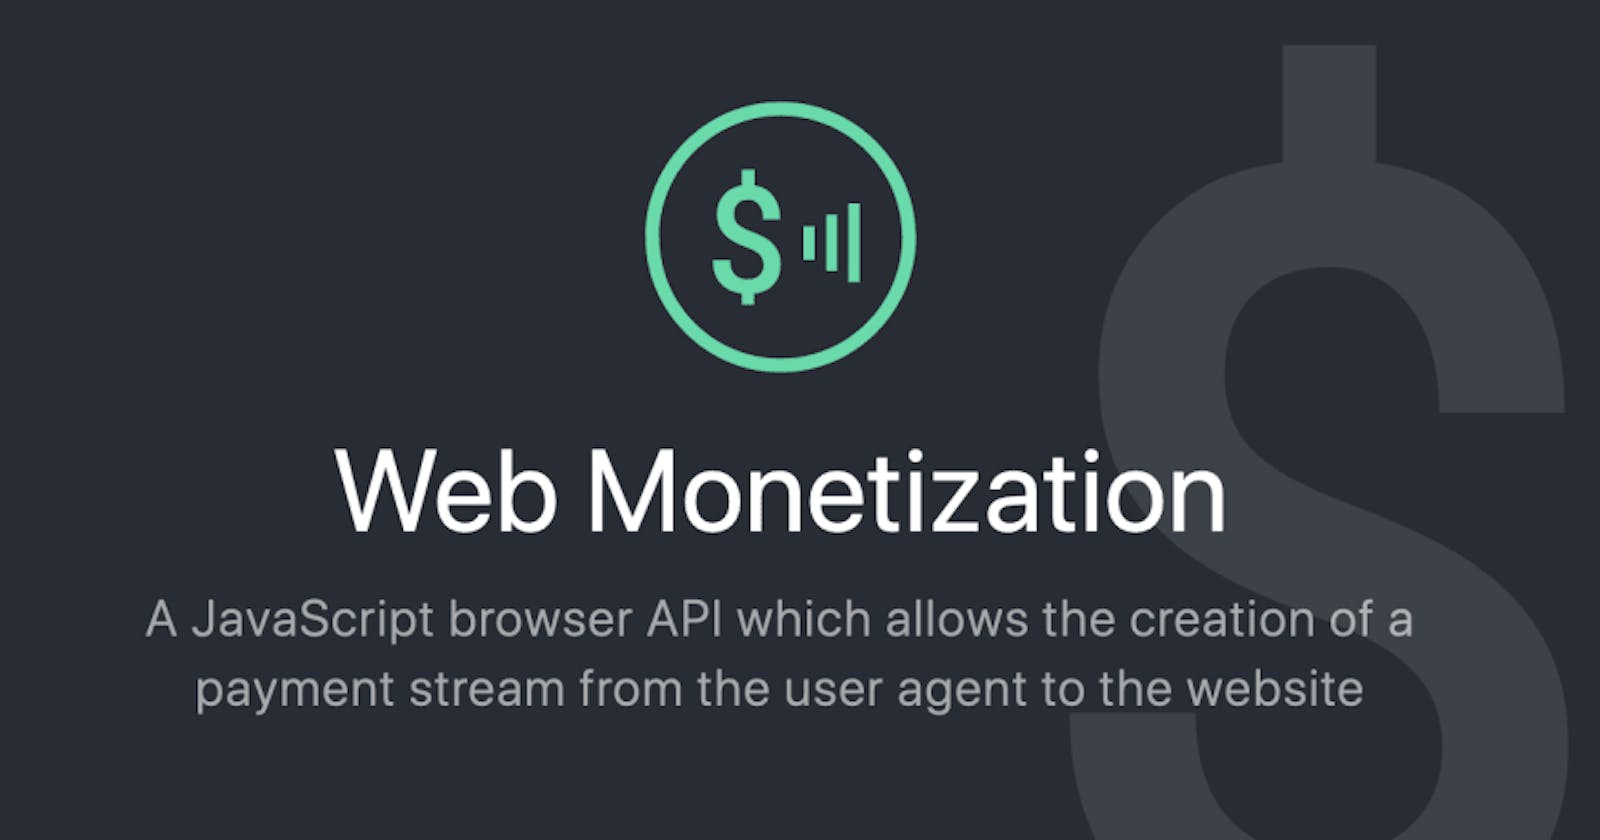 What Does Web Monetization Mean to Me?